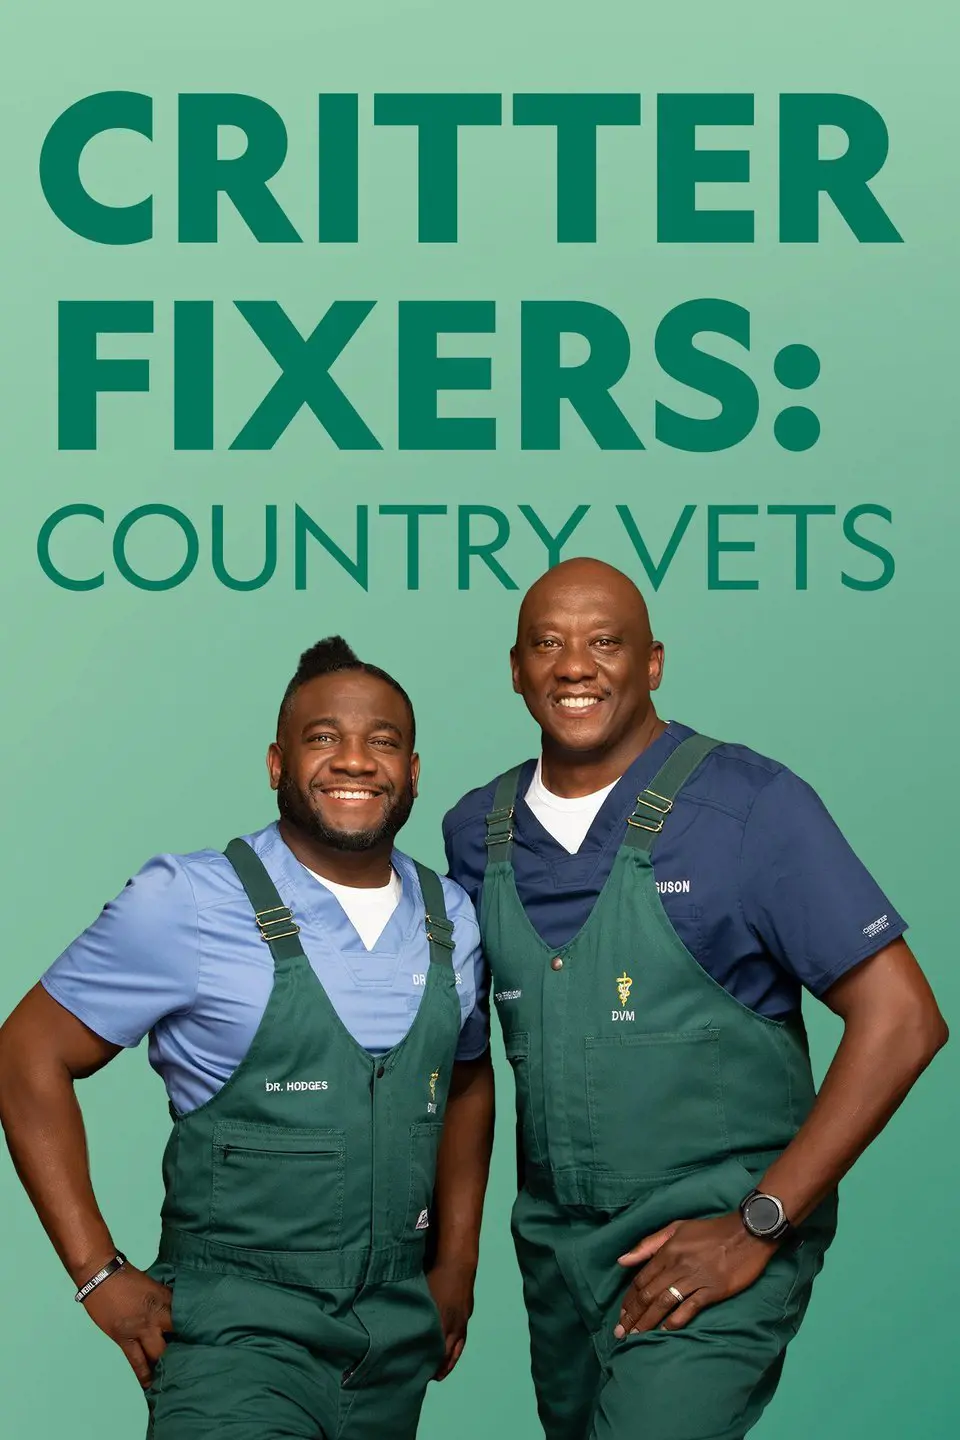 Critter Fixers: Country Vets is a Nat Geo Wild documentary series, following the daily professional lives of two veterinarians